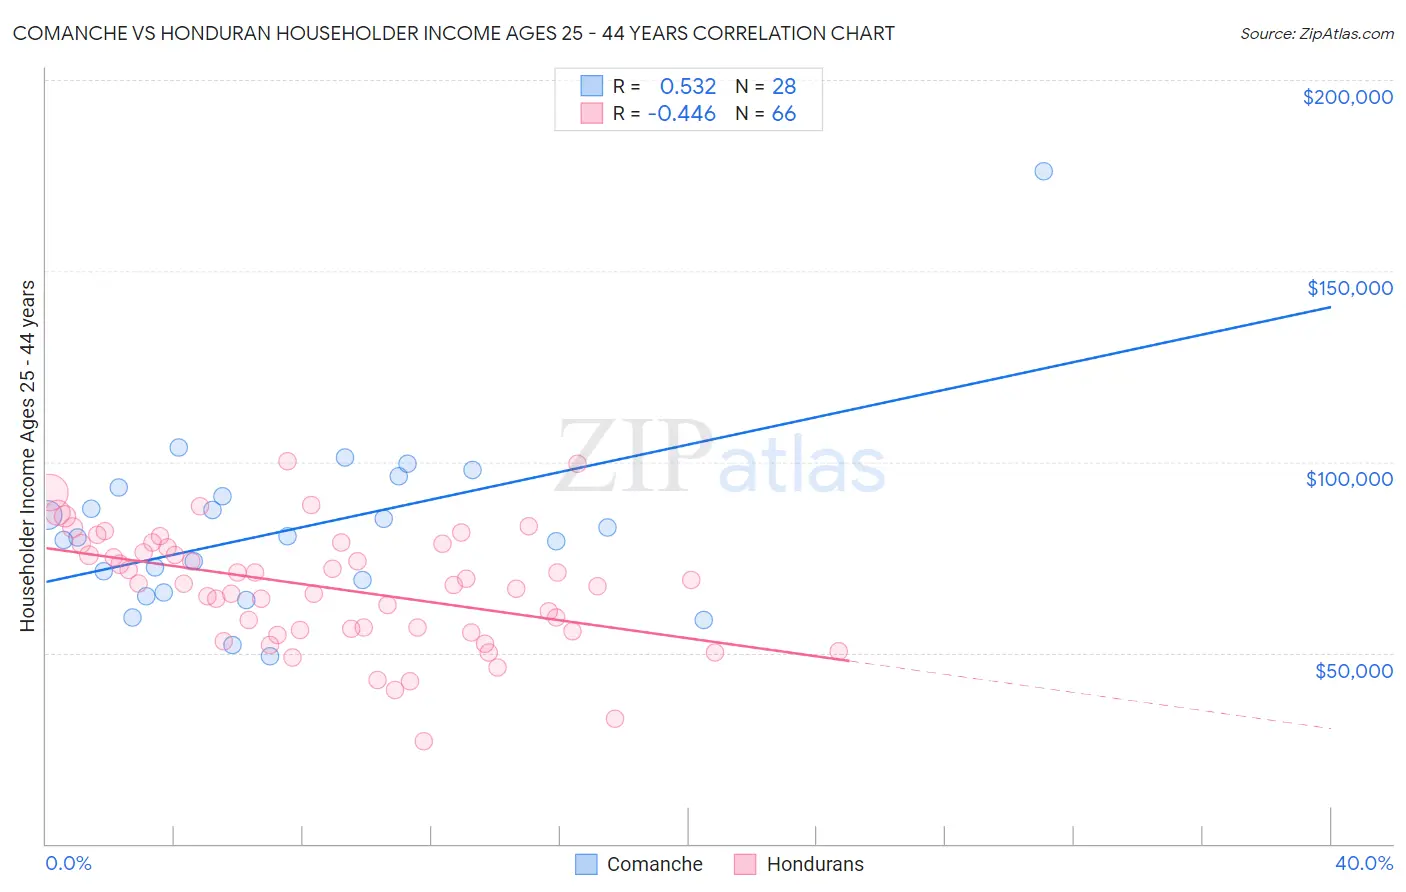 Comanche vs Honduran Householder Income Ages 25 - 44 years